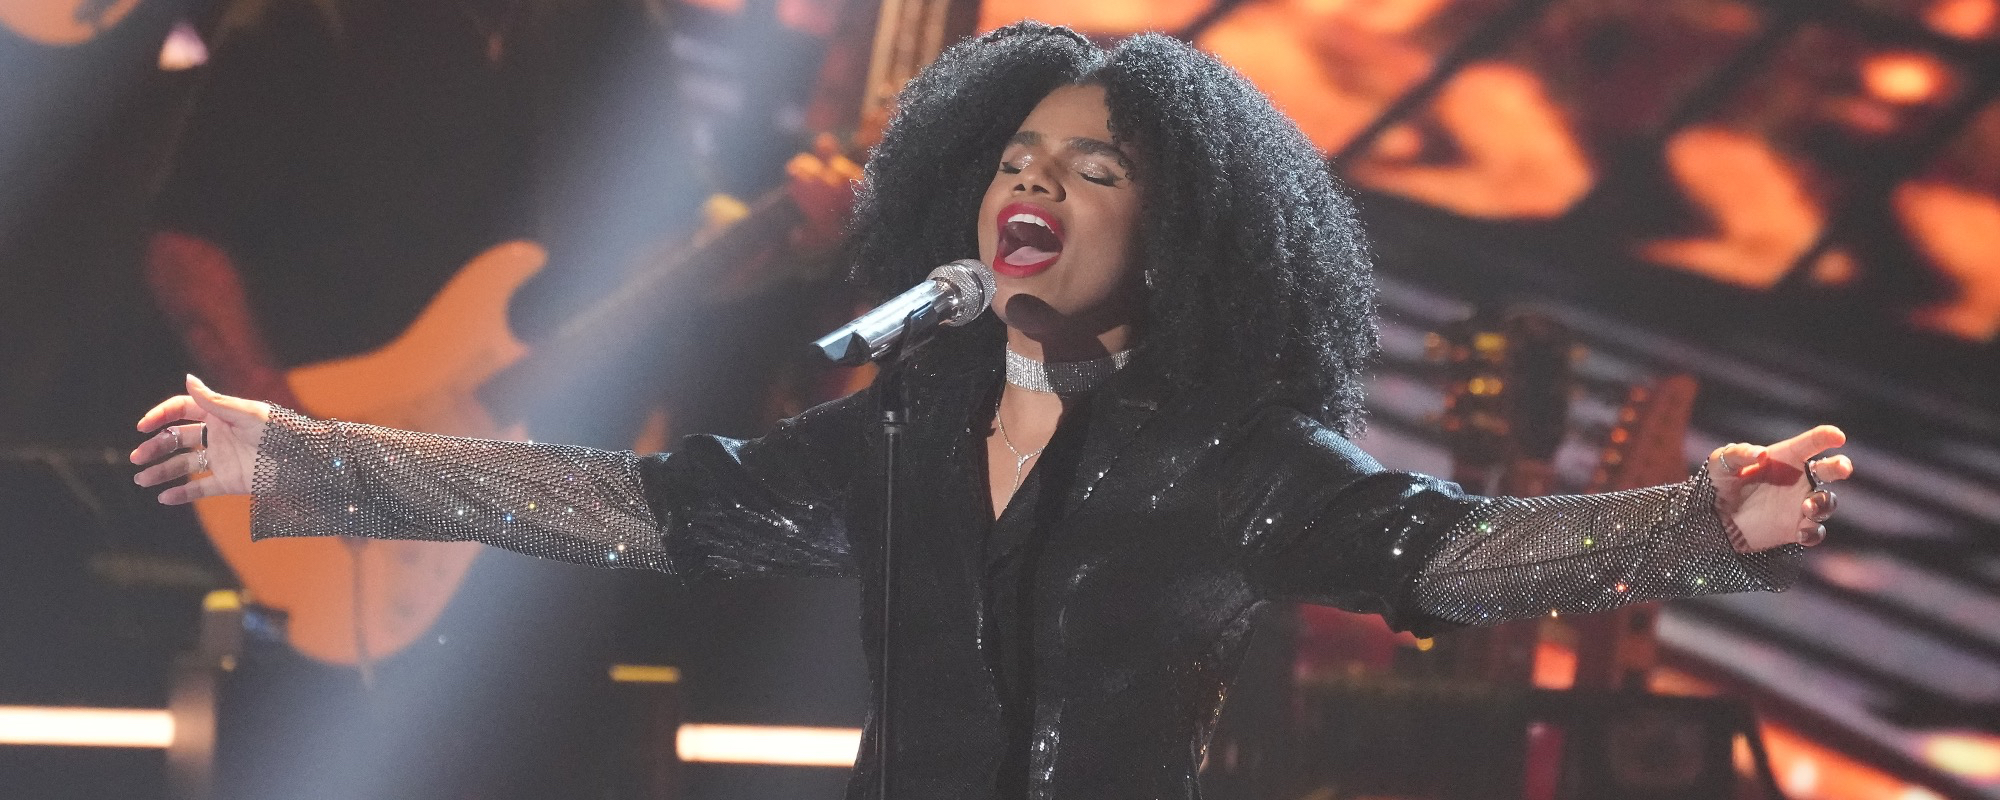 Wé Ani Rounds Out Top 20 with Powerful Performance of Adele’s “Skyfall” on ‘Idol’